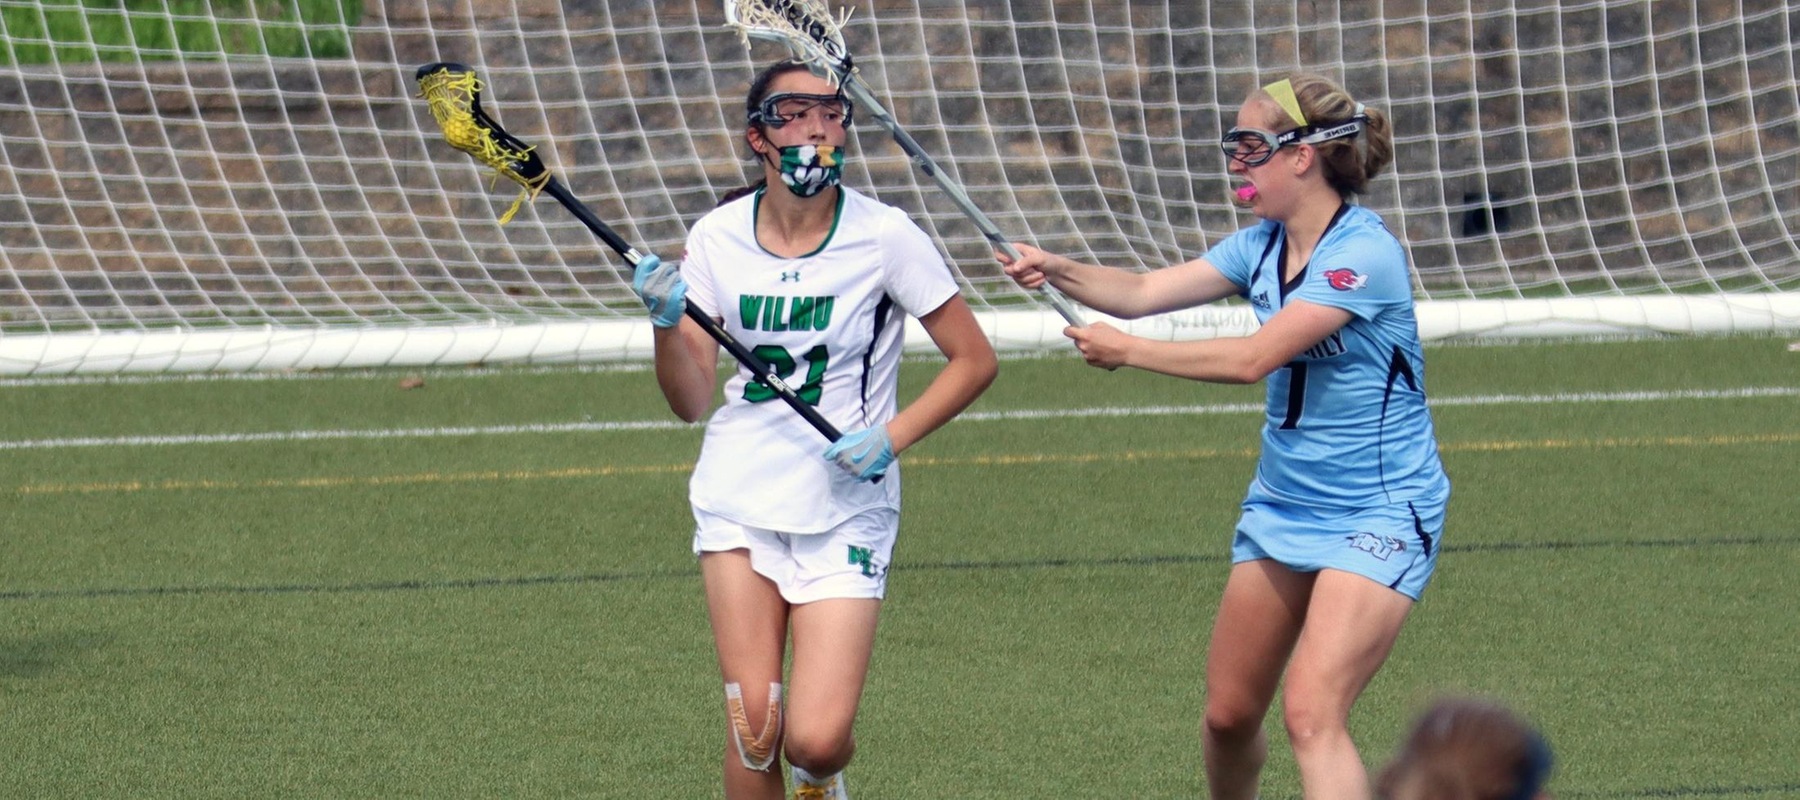 Photo of freshman Amelie Gamache who led the Wildcats with five goals against Holy Family. Copyright 2021; Wilmington University. All rights reserved. Photo by Dan Lauletta. April 28, 2021 vs. Holy Family.